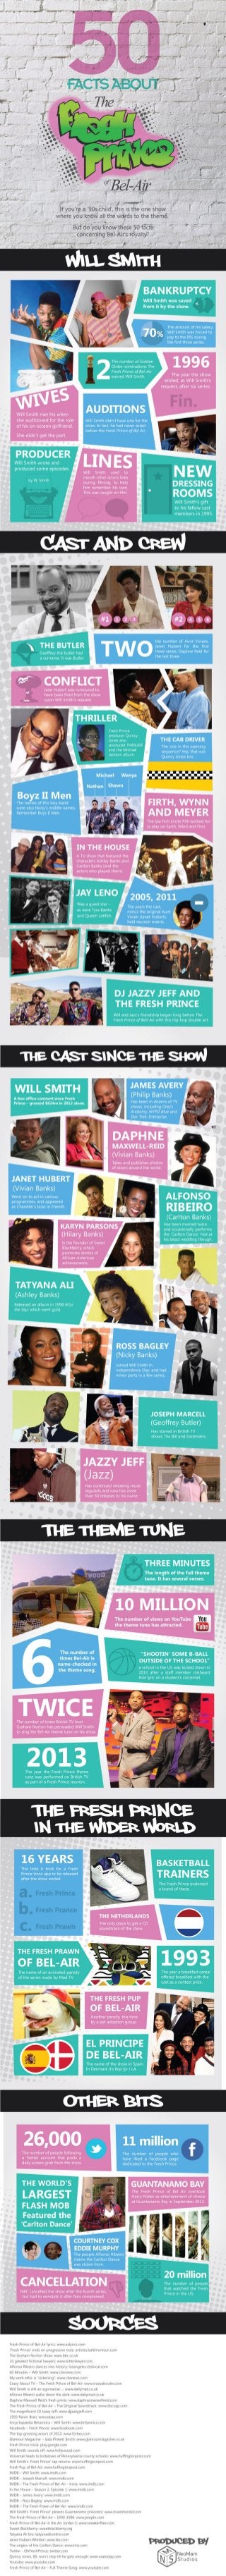 50 Facts about The Fresh Prince of Bel-Air [Infographic]